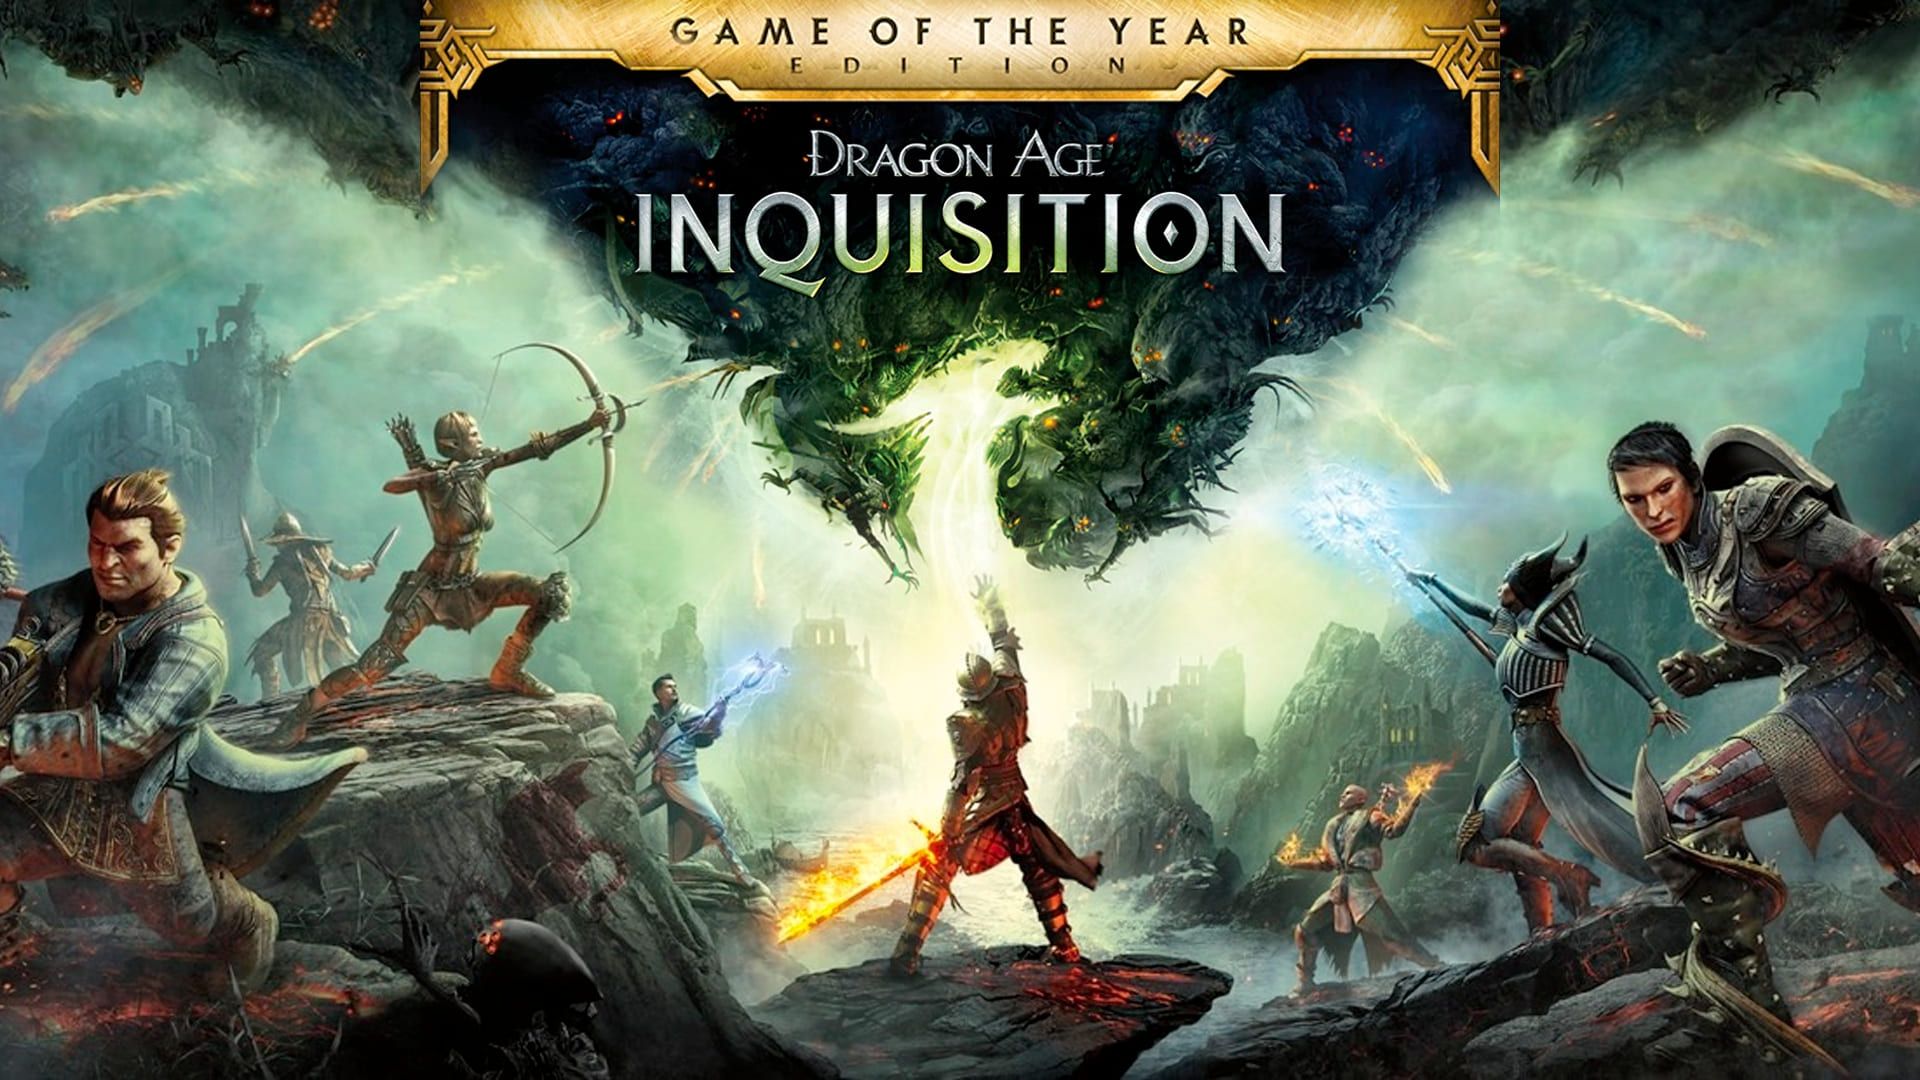 Dragon Age Inquisition Game of the Year Edition - Free Epic Games Game